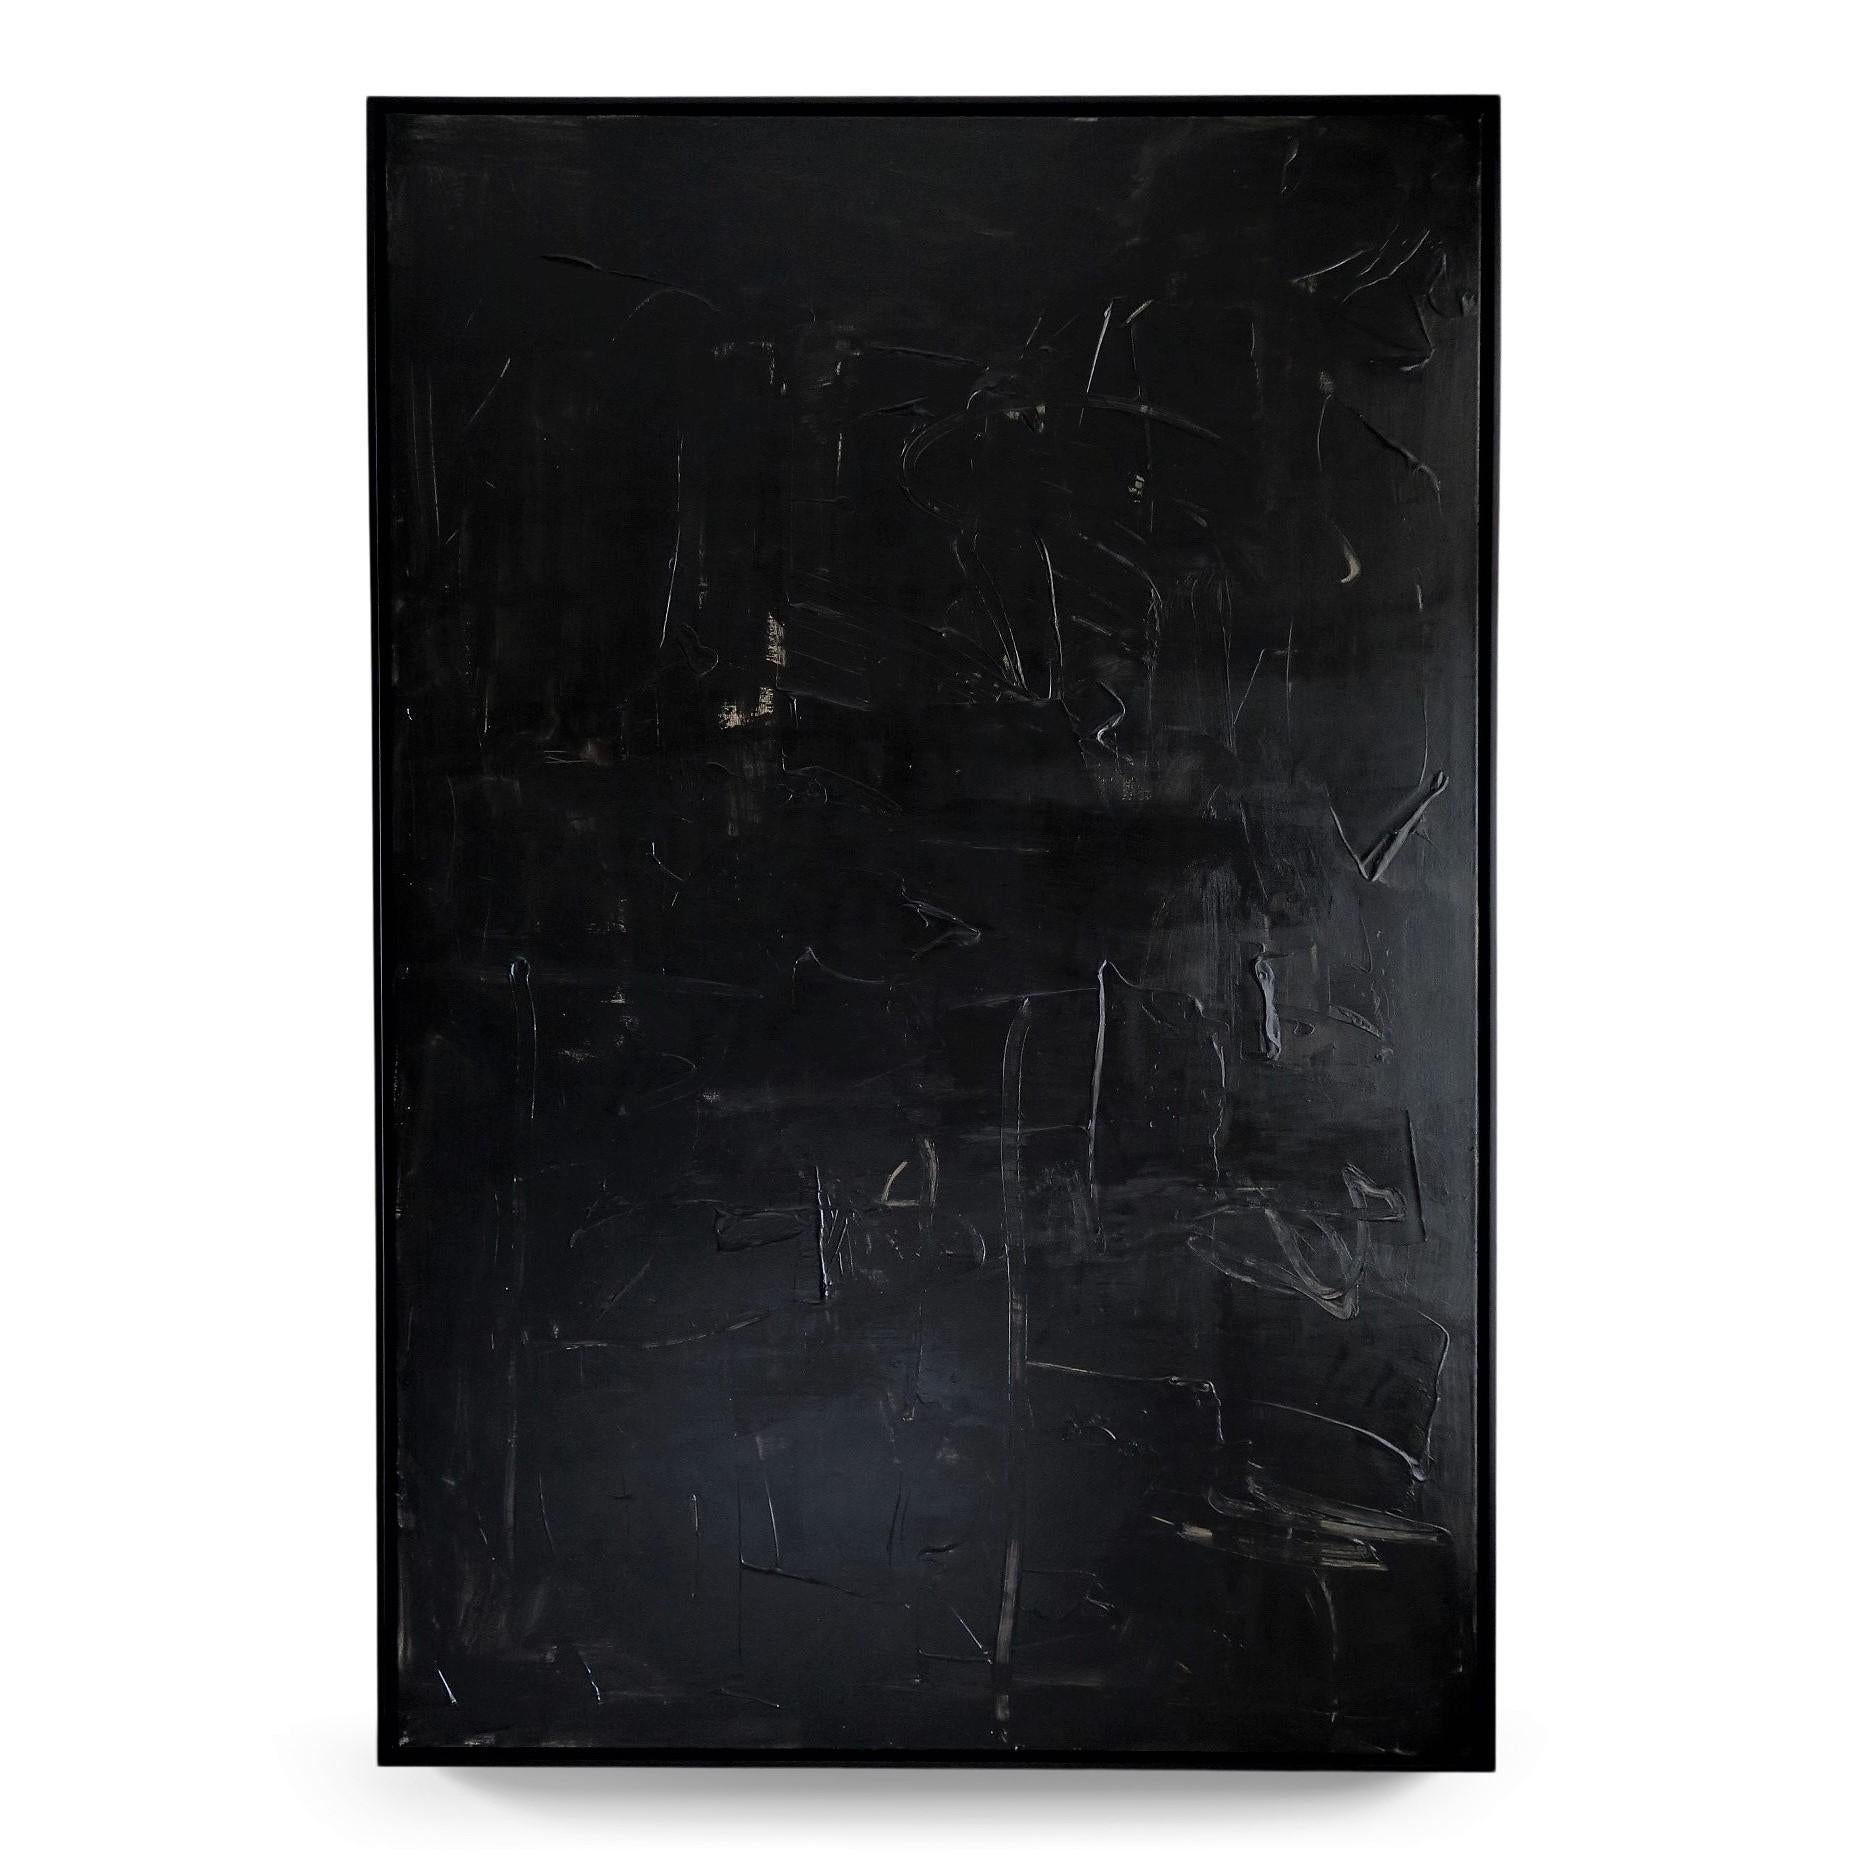 Karina Gentinetta Abstract Painting - "Nuit" Acrylic and Plaster Textured Black Abstract, 2021, 72"x48